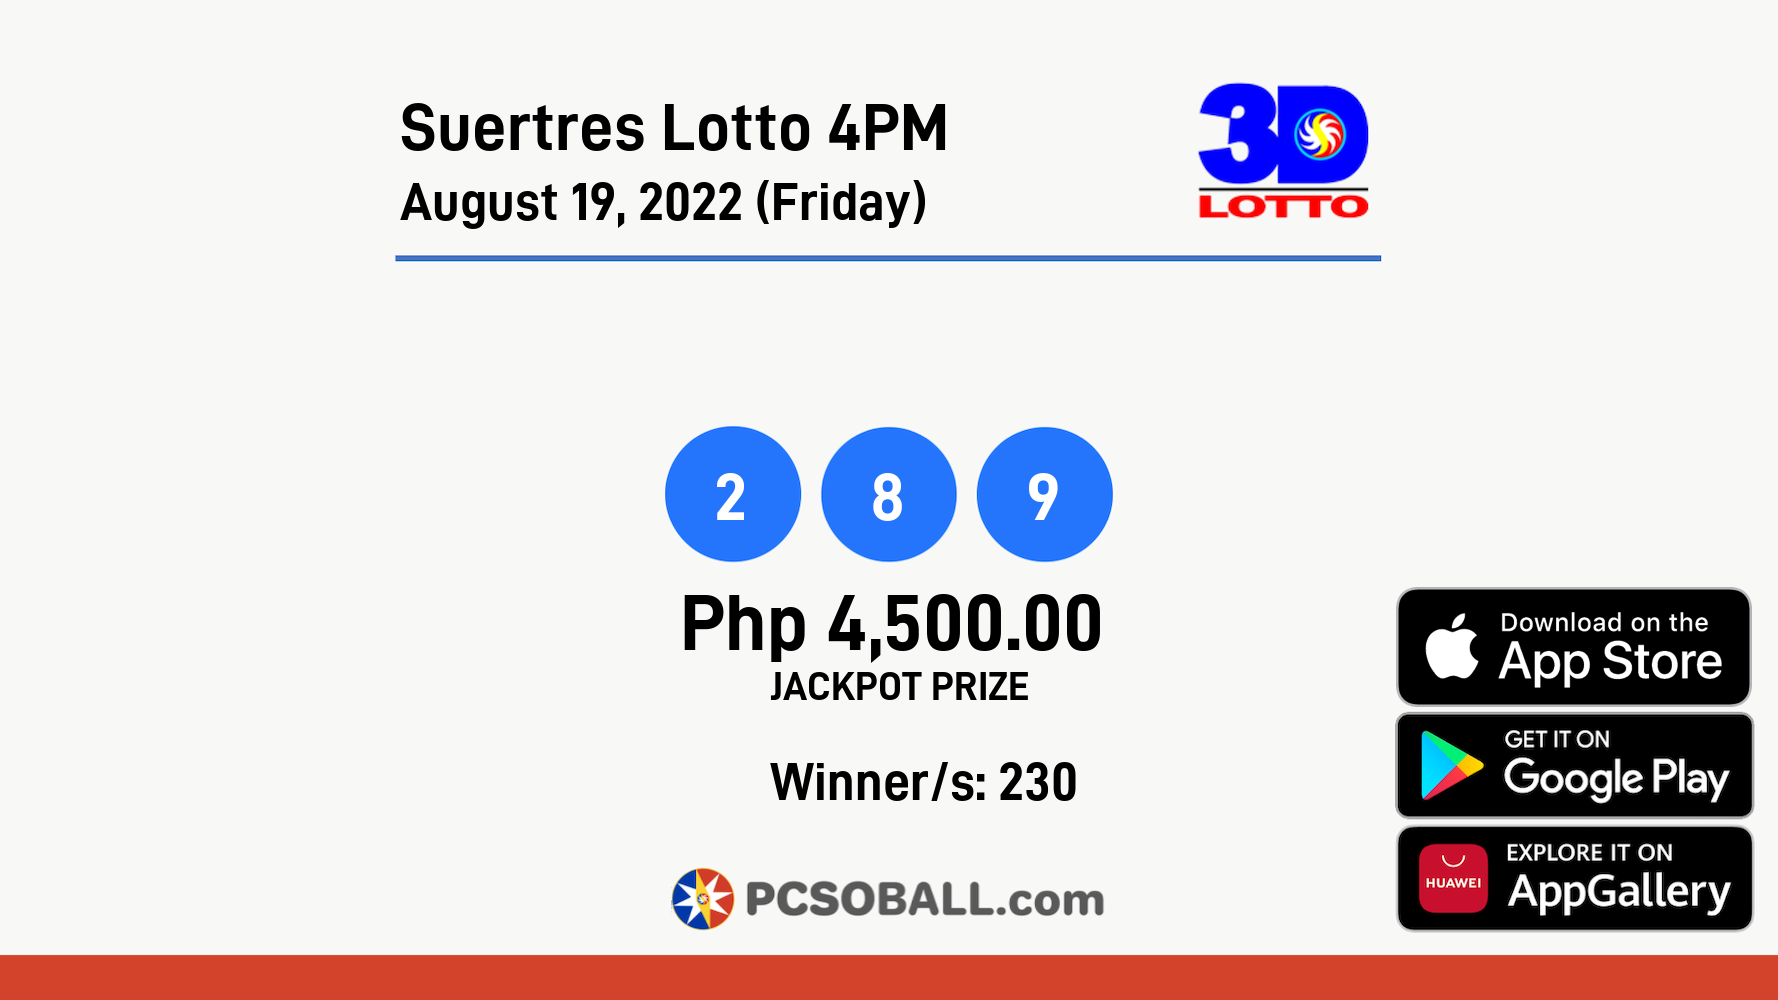 Suertres Lotto 4PM August 19, 2022 (Friday) Result